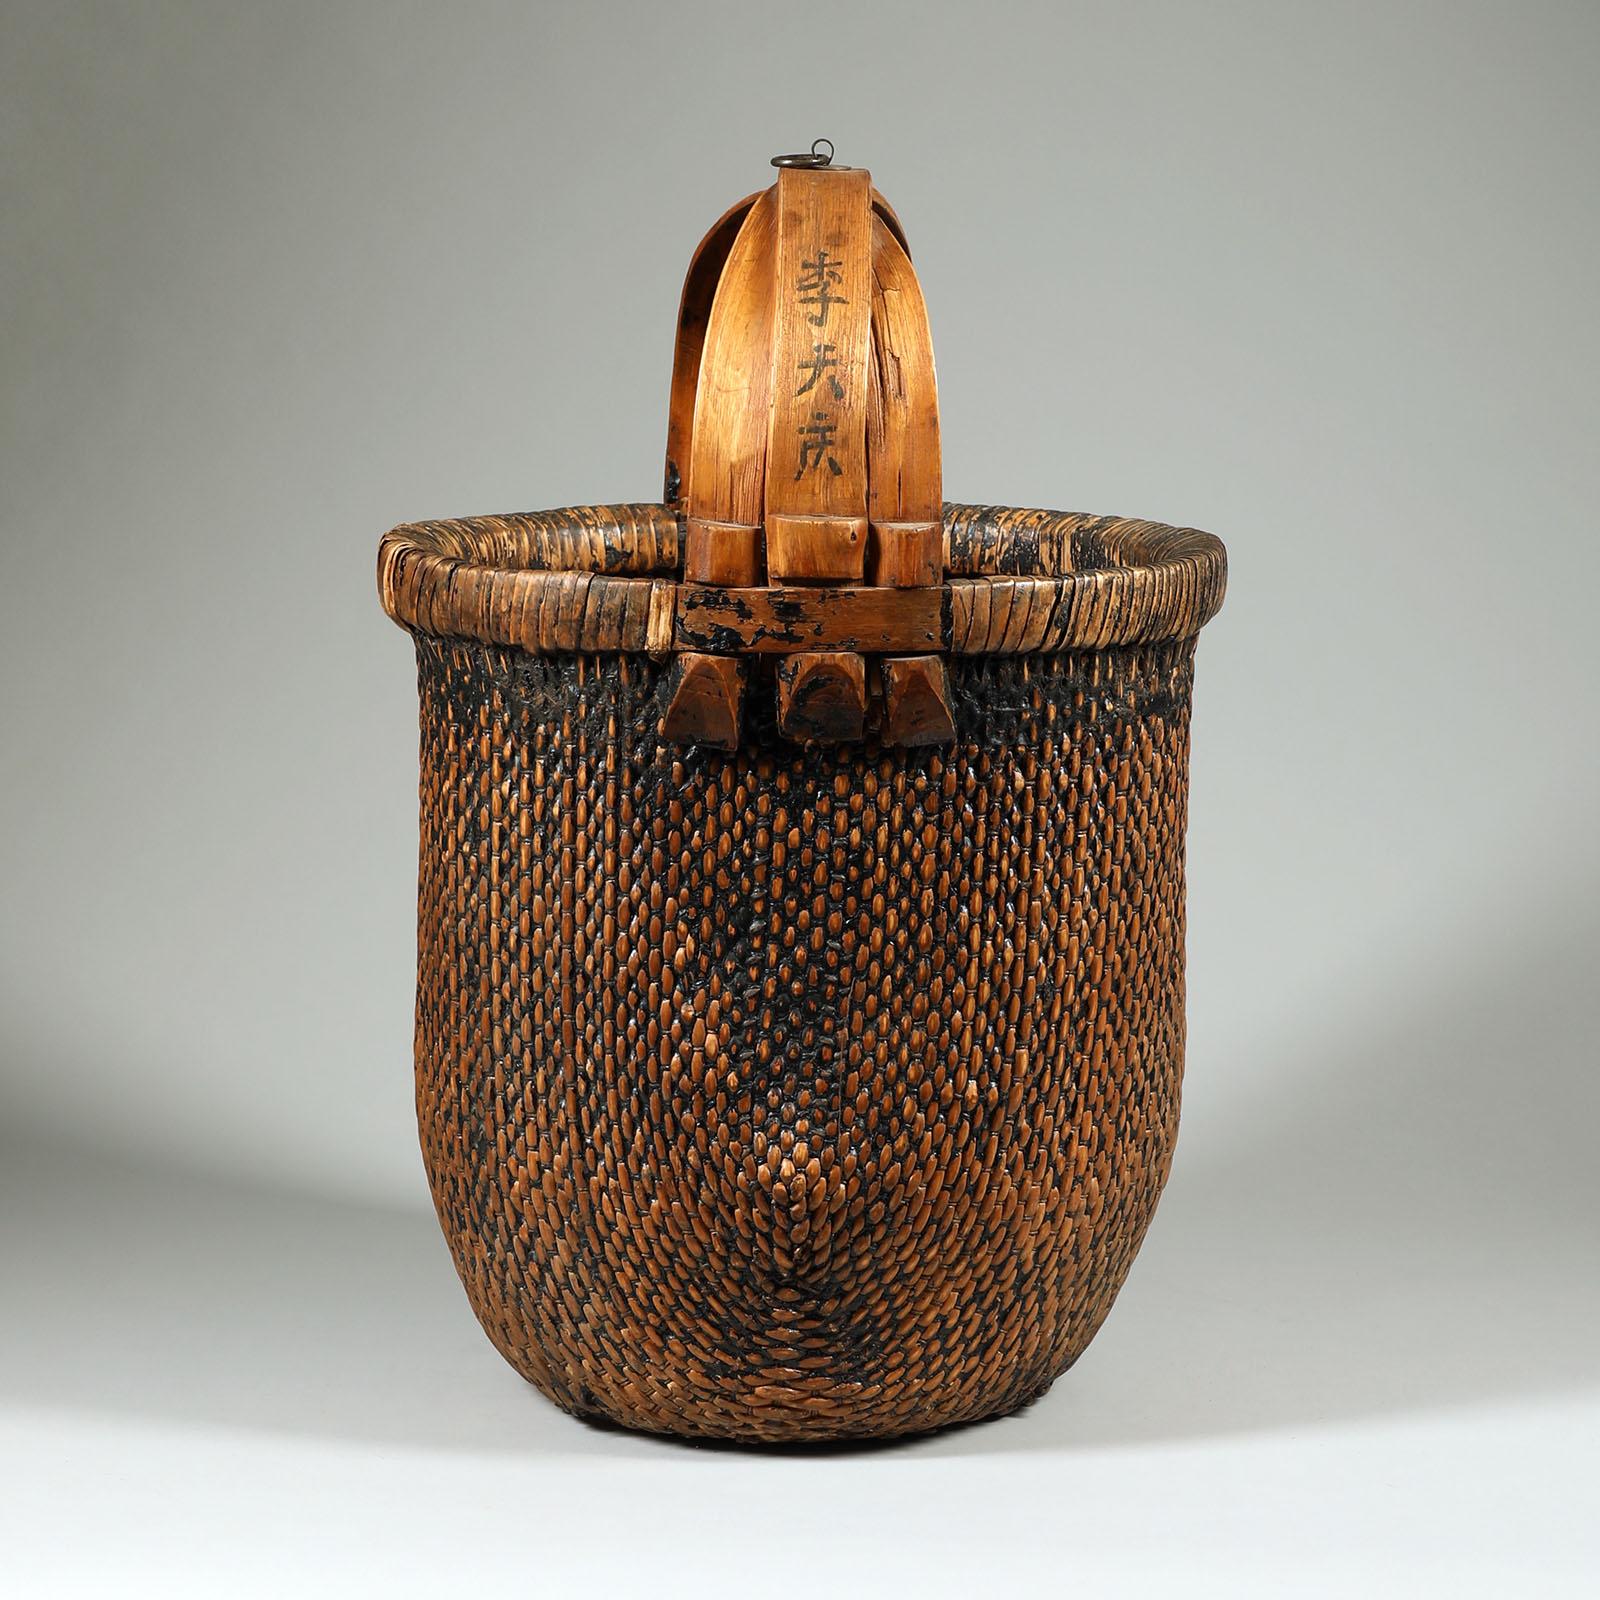 Large Early 20th Century Willow Grain Basket, China

Traditionally used to carry rice or other grains, this basket is strong and sturdy.
24 inches (60.96 cm) high by 16 inches (40.64 cm) diameter



